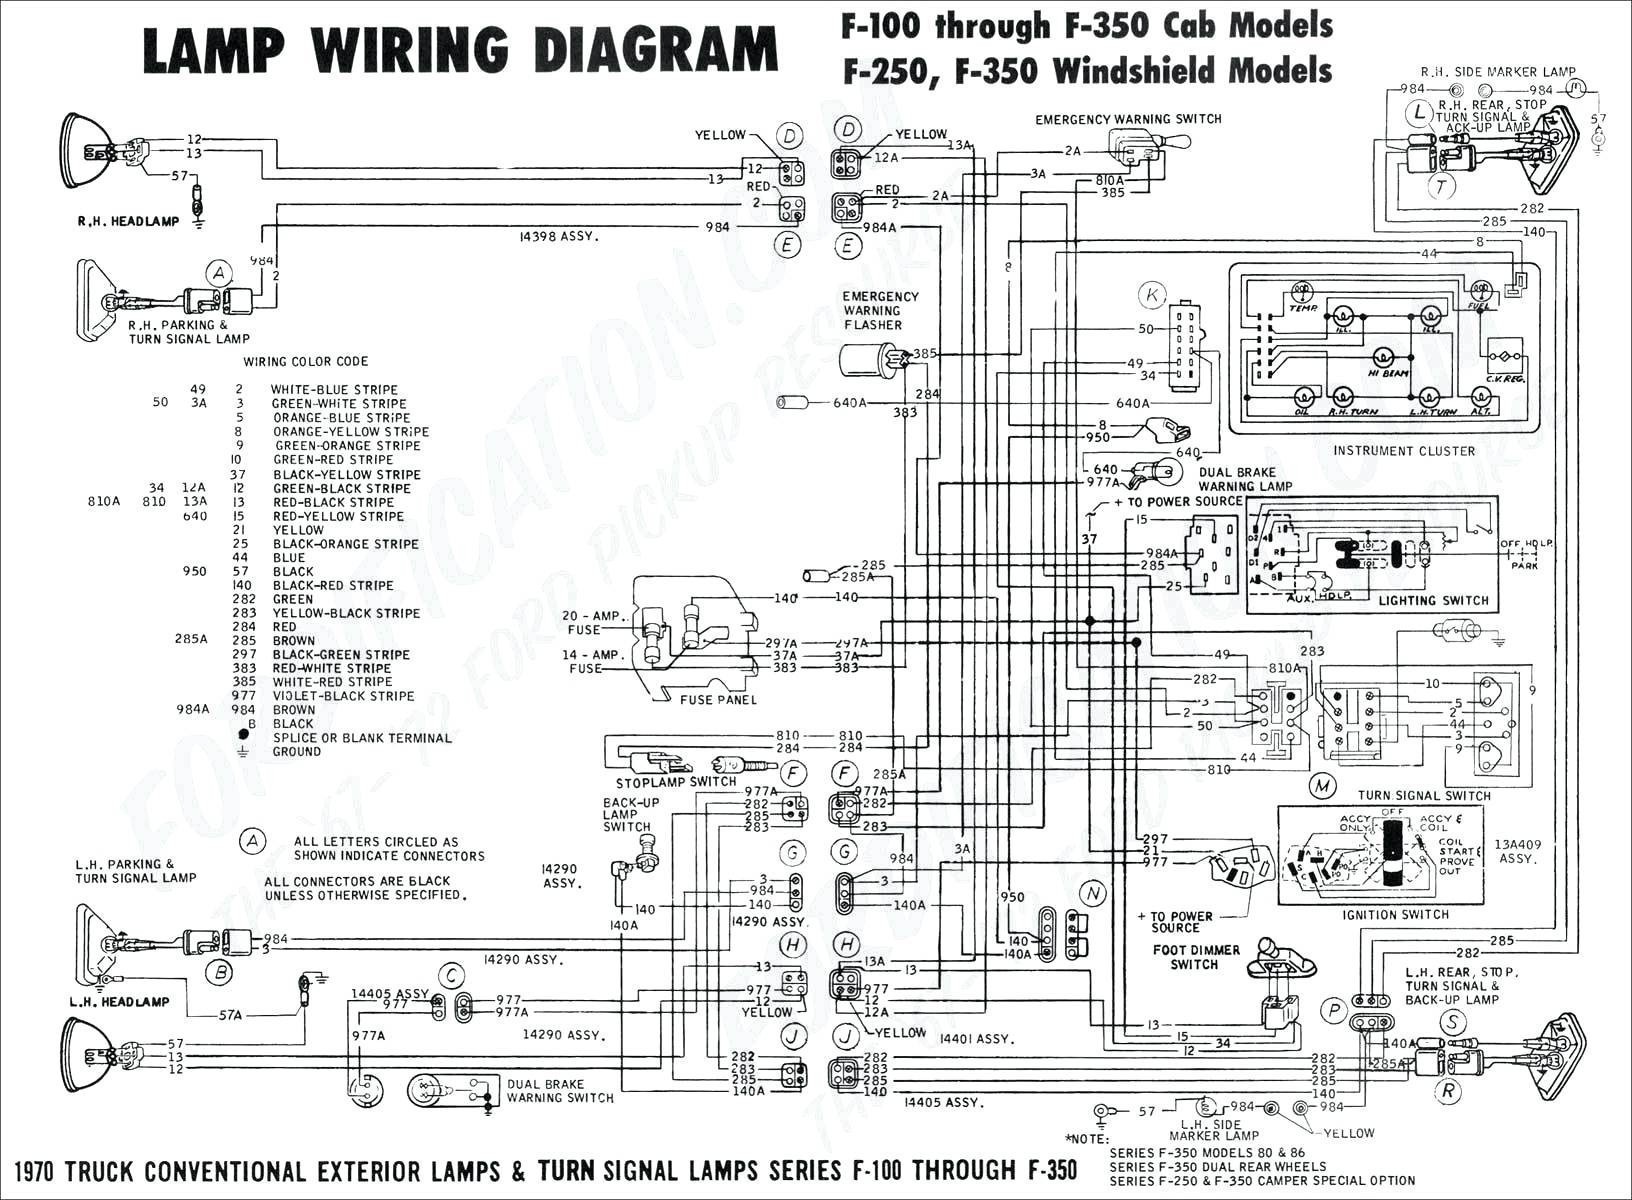 Car Ignition Wiring Diagram Msd Ignition Wiring Diagrams for 8950 Of Car Ignition Wiring Diagram